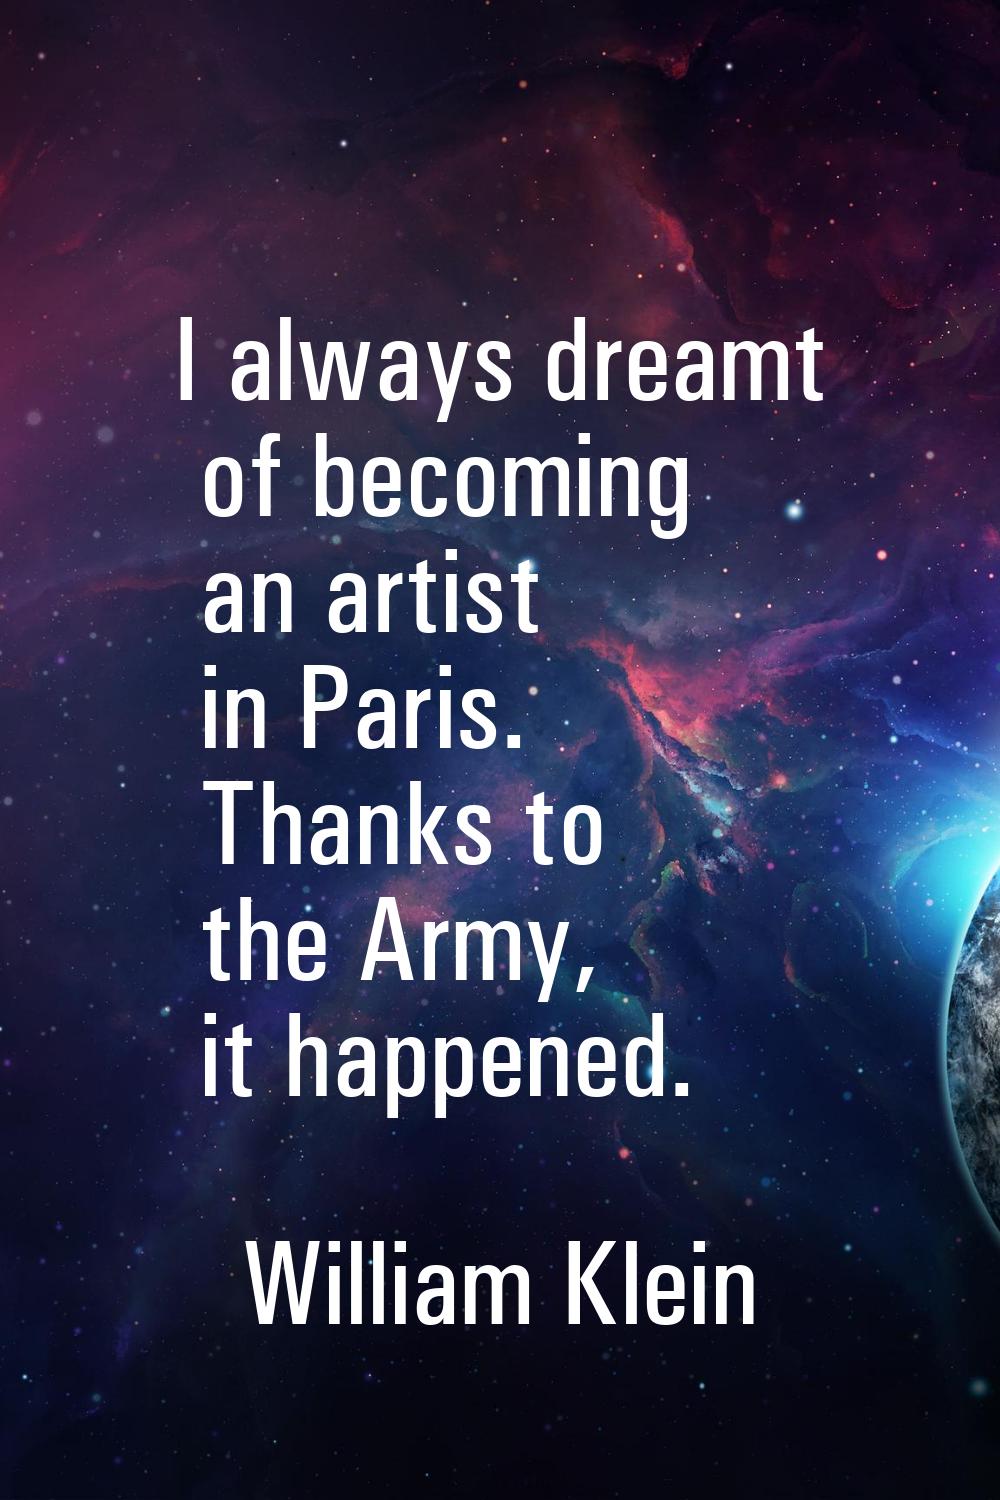 I always dreamt of becoming an artist in Paris. Thanks to the Army, it happened.